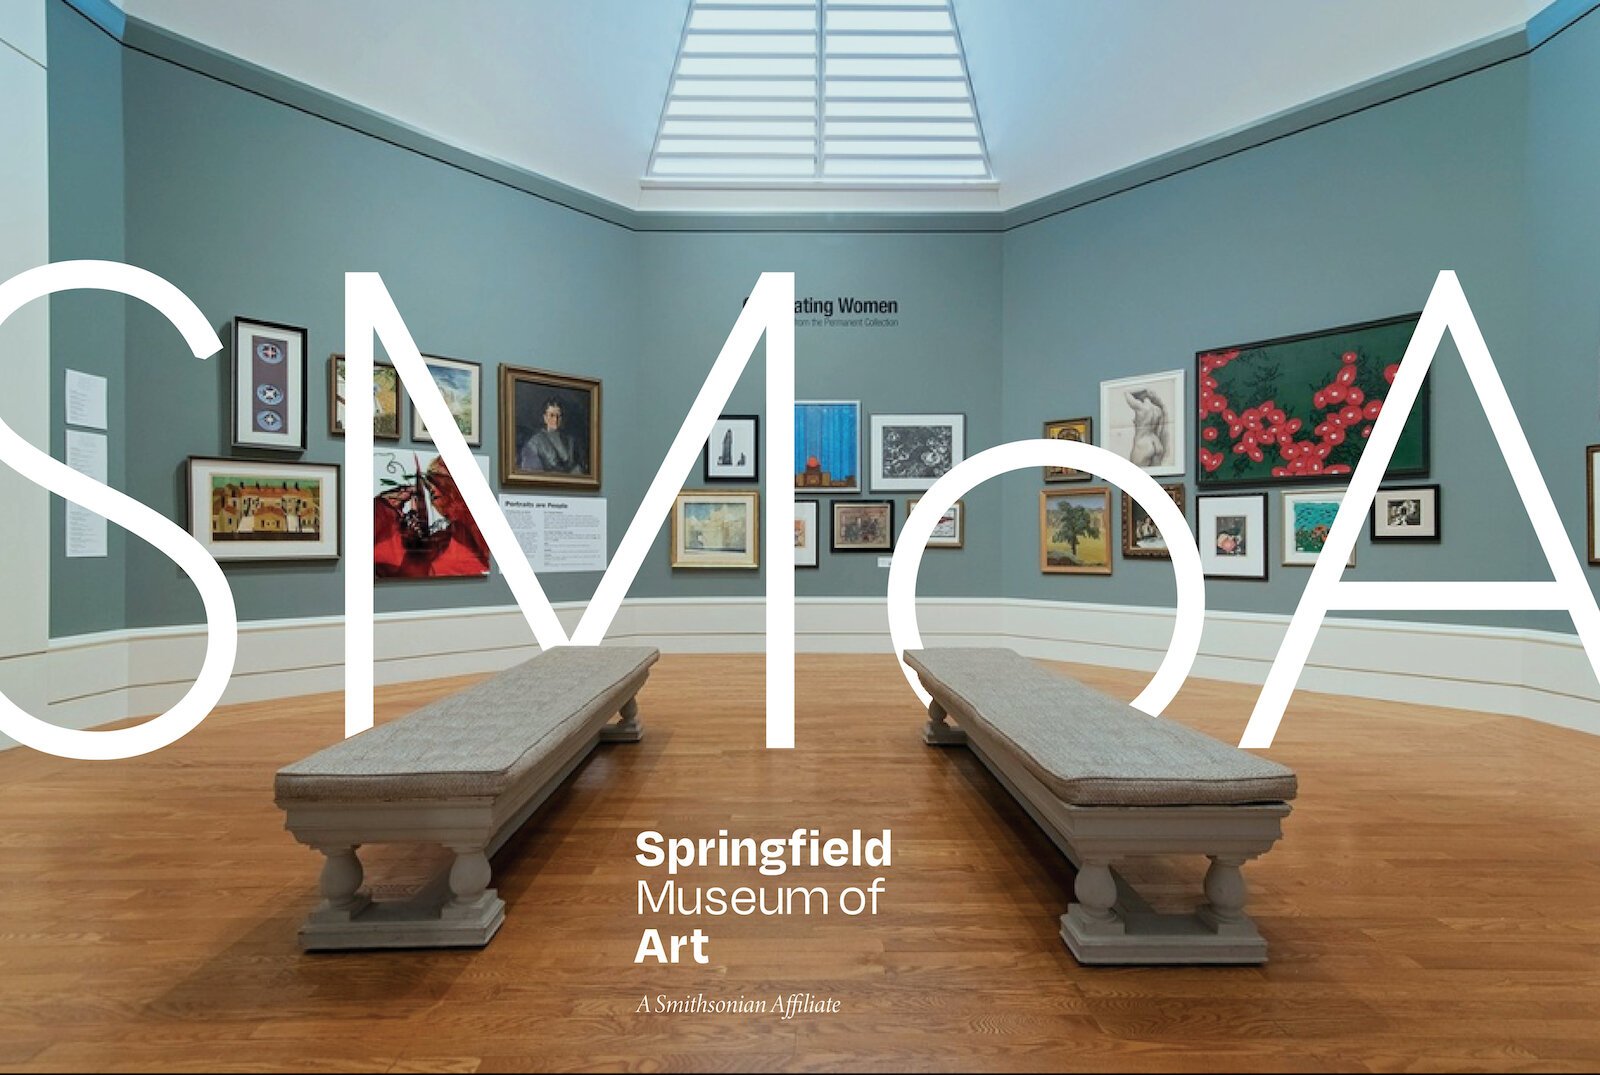 The museum also has introduced a new logo, signage, and branding, in collaboration with the Springfield-based Hucklebuck Design Studio